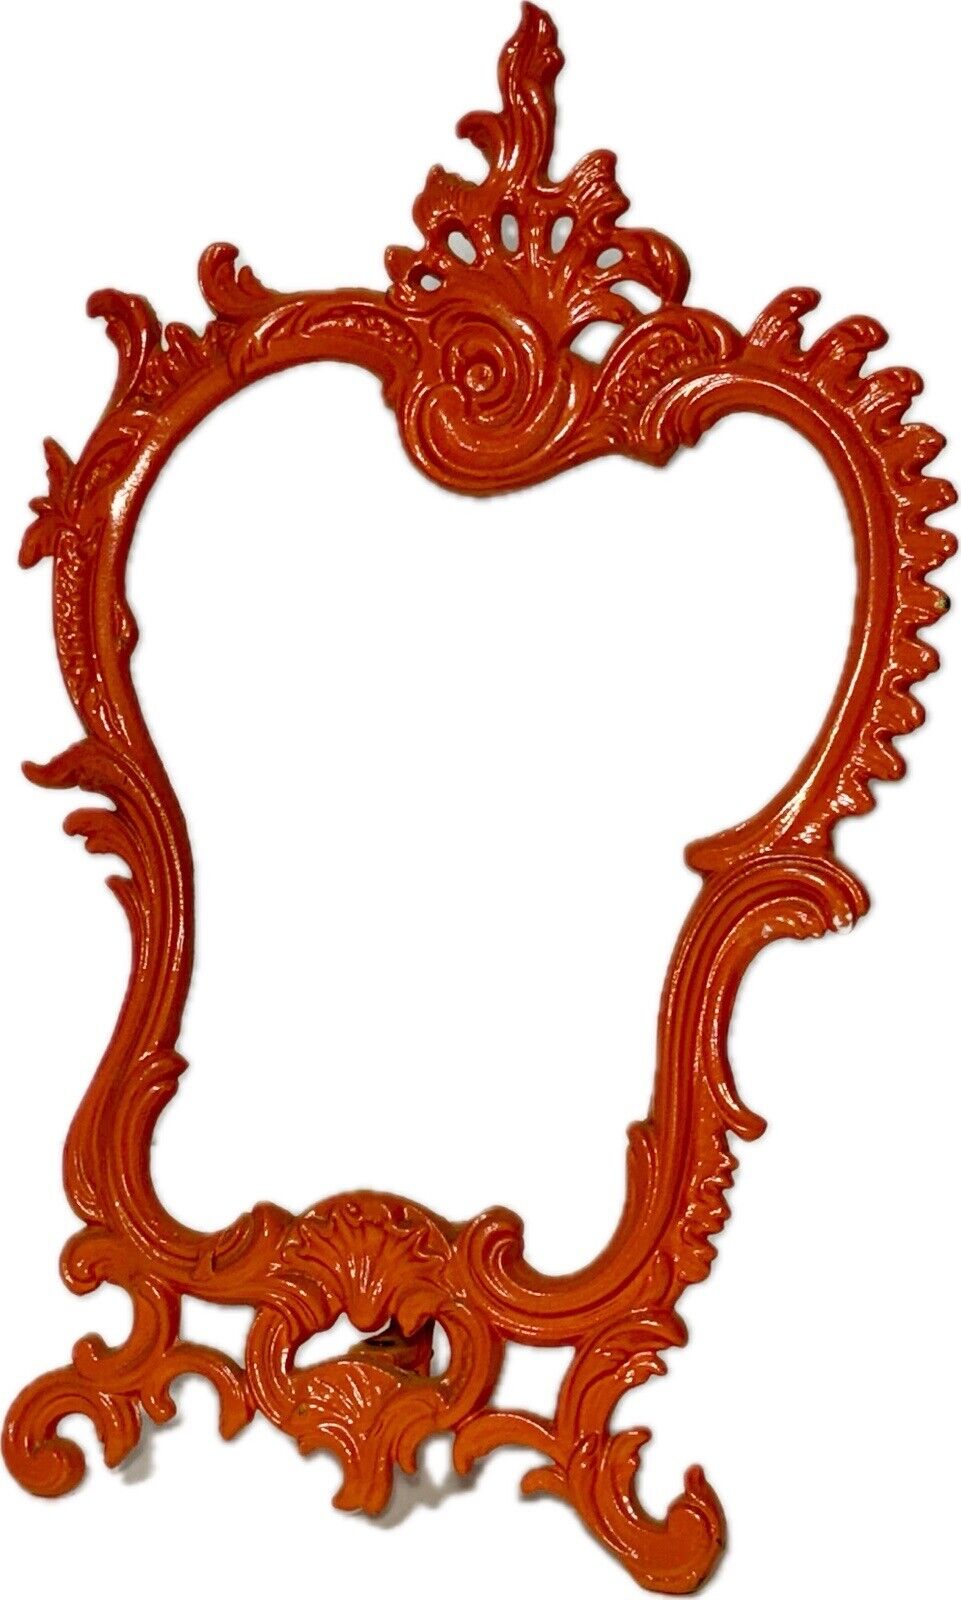 VTG Ornate Cast Iron Art Picture Frame 13.5” Tall Painted Stamped Iron Art JM35